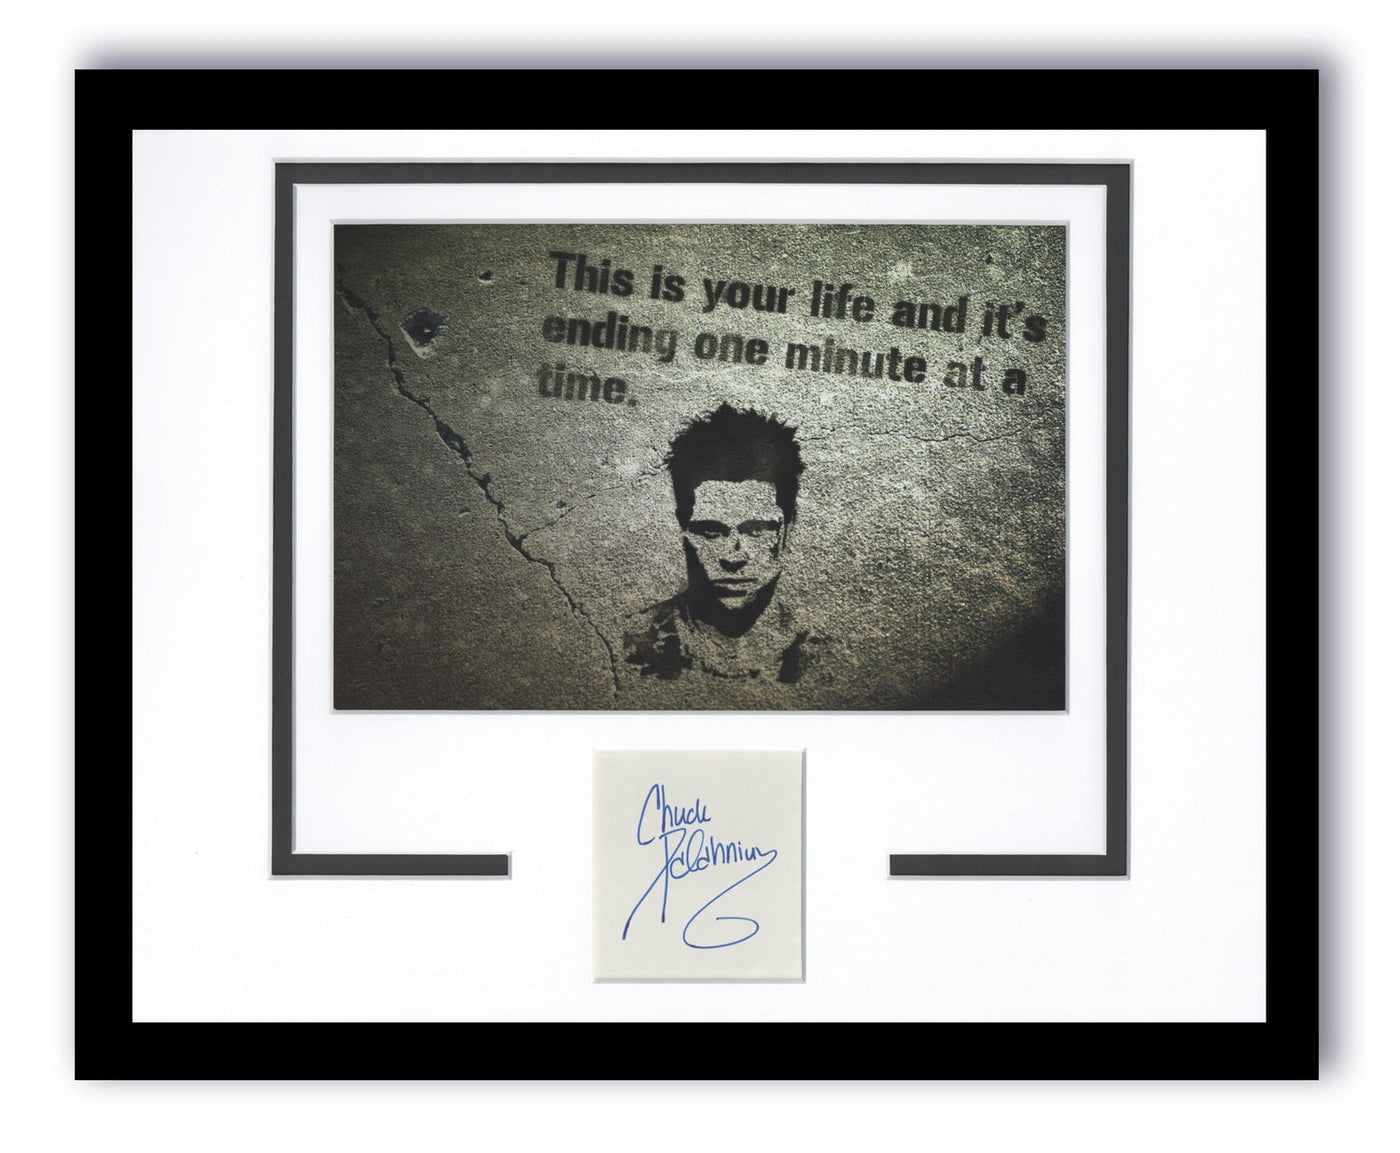 Fight Club Chuck Palahniuk Signed 11x14 Framed Poster Autographed Photo ACOA